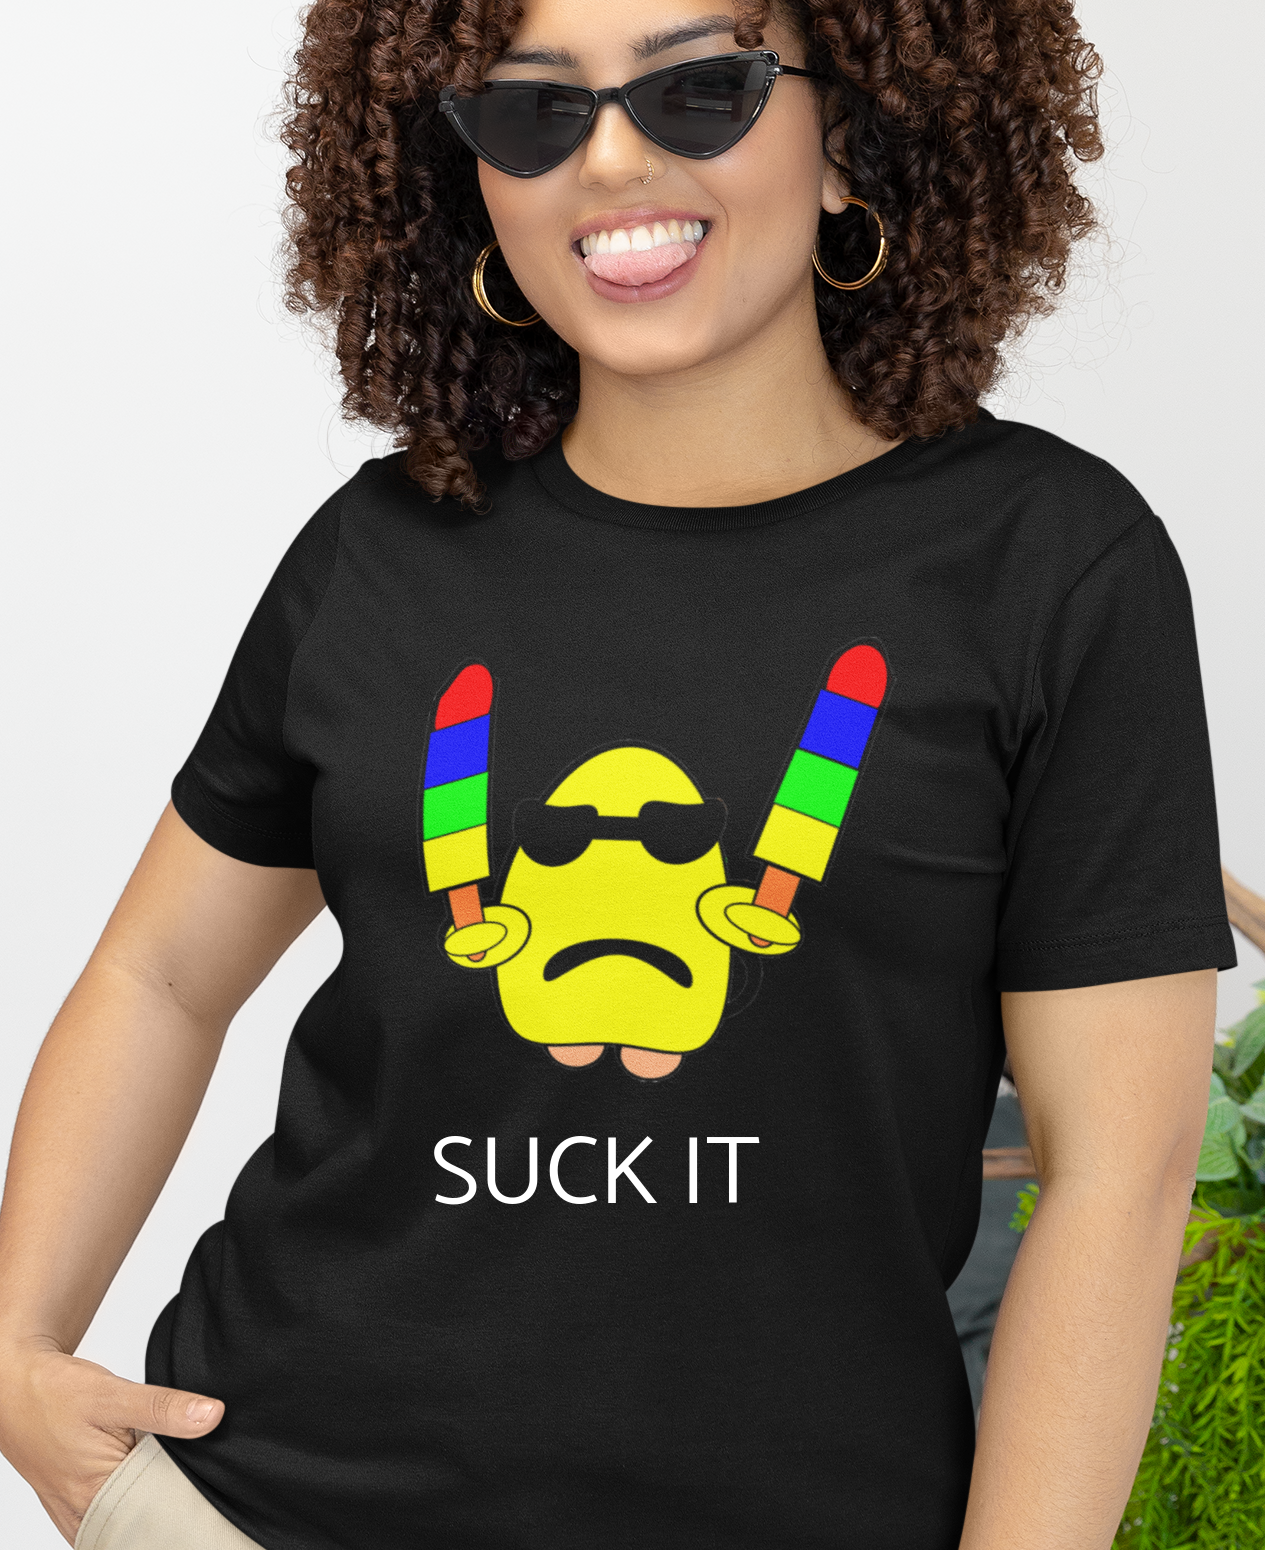 black t-shirt with a yellow gumdrop holding two popsicles and the caption 'suck it'.